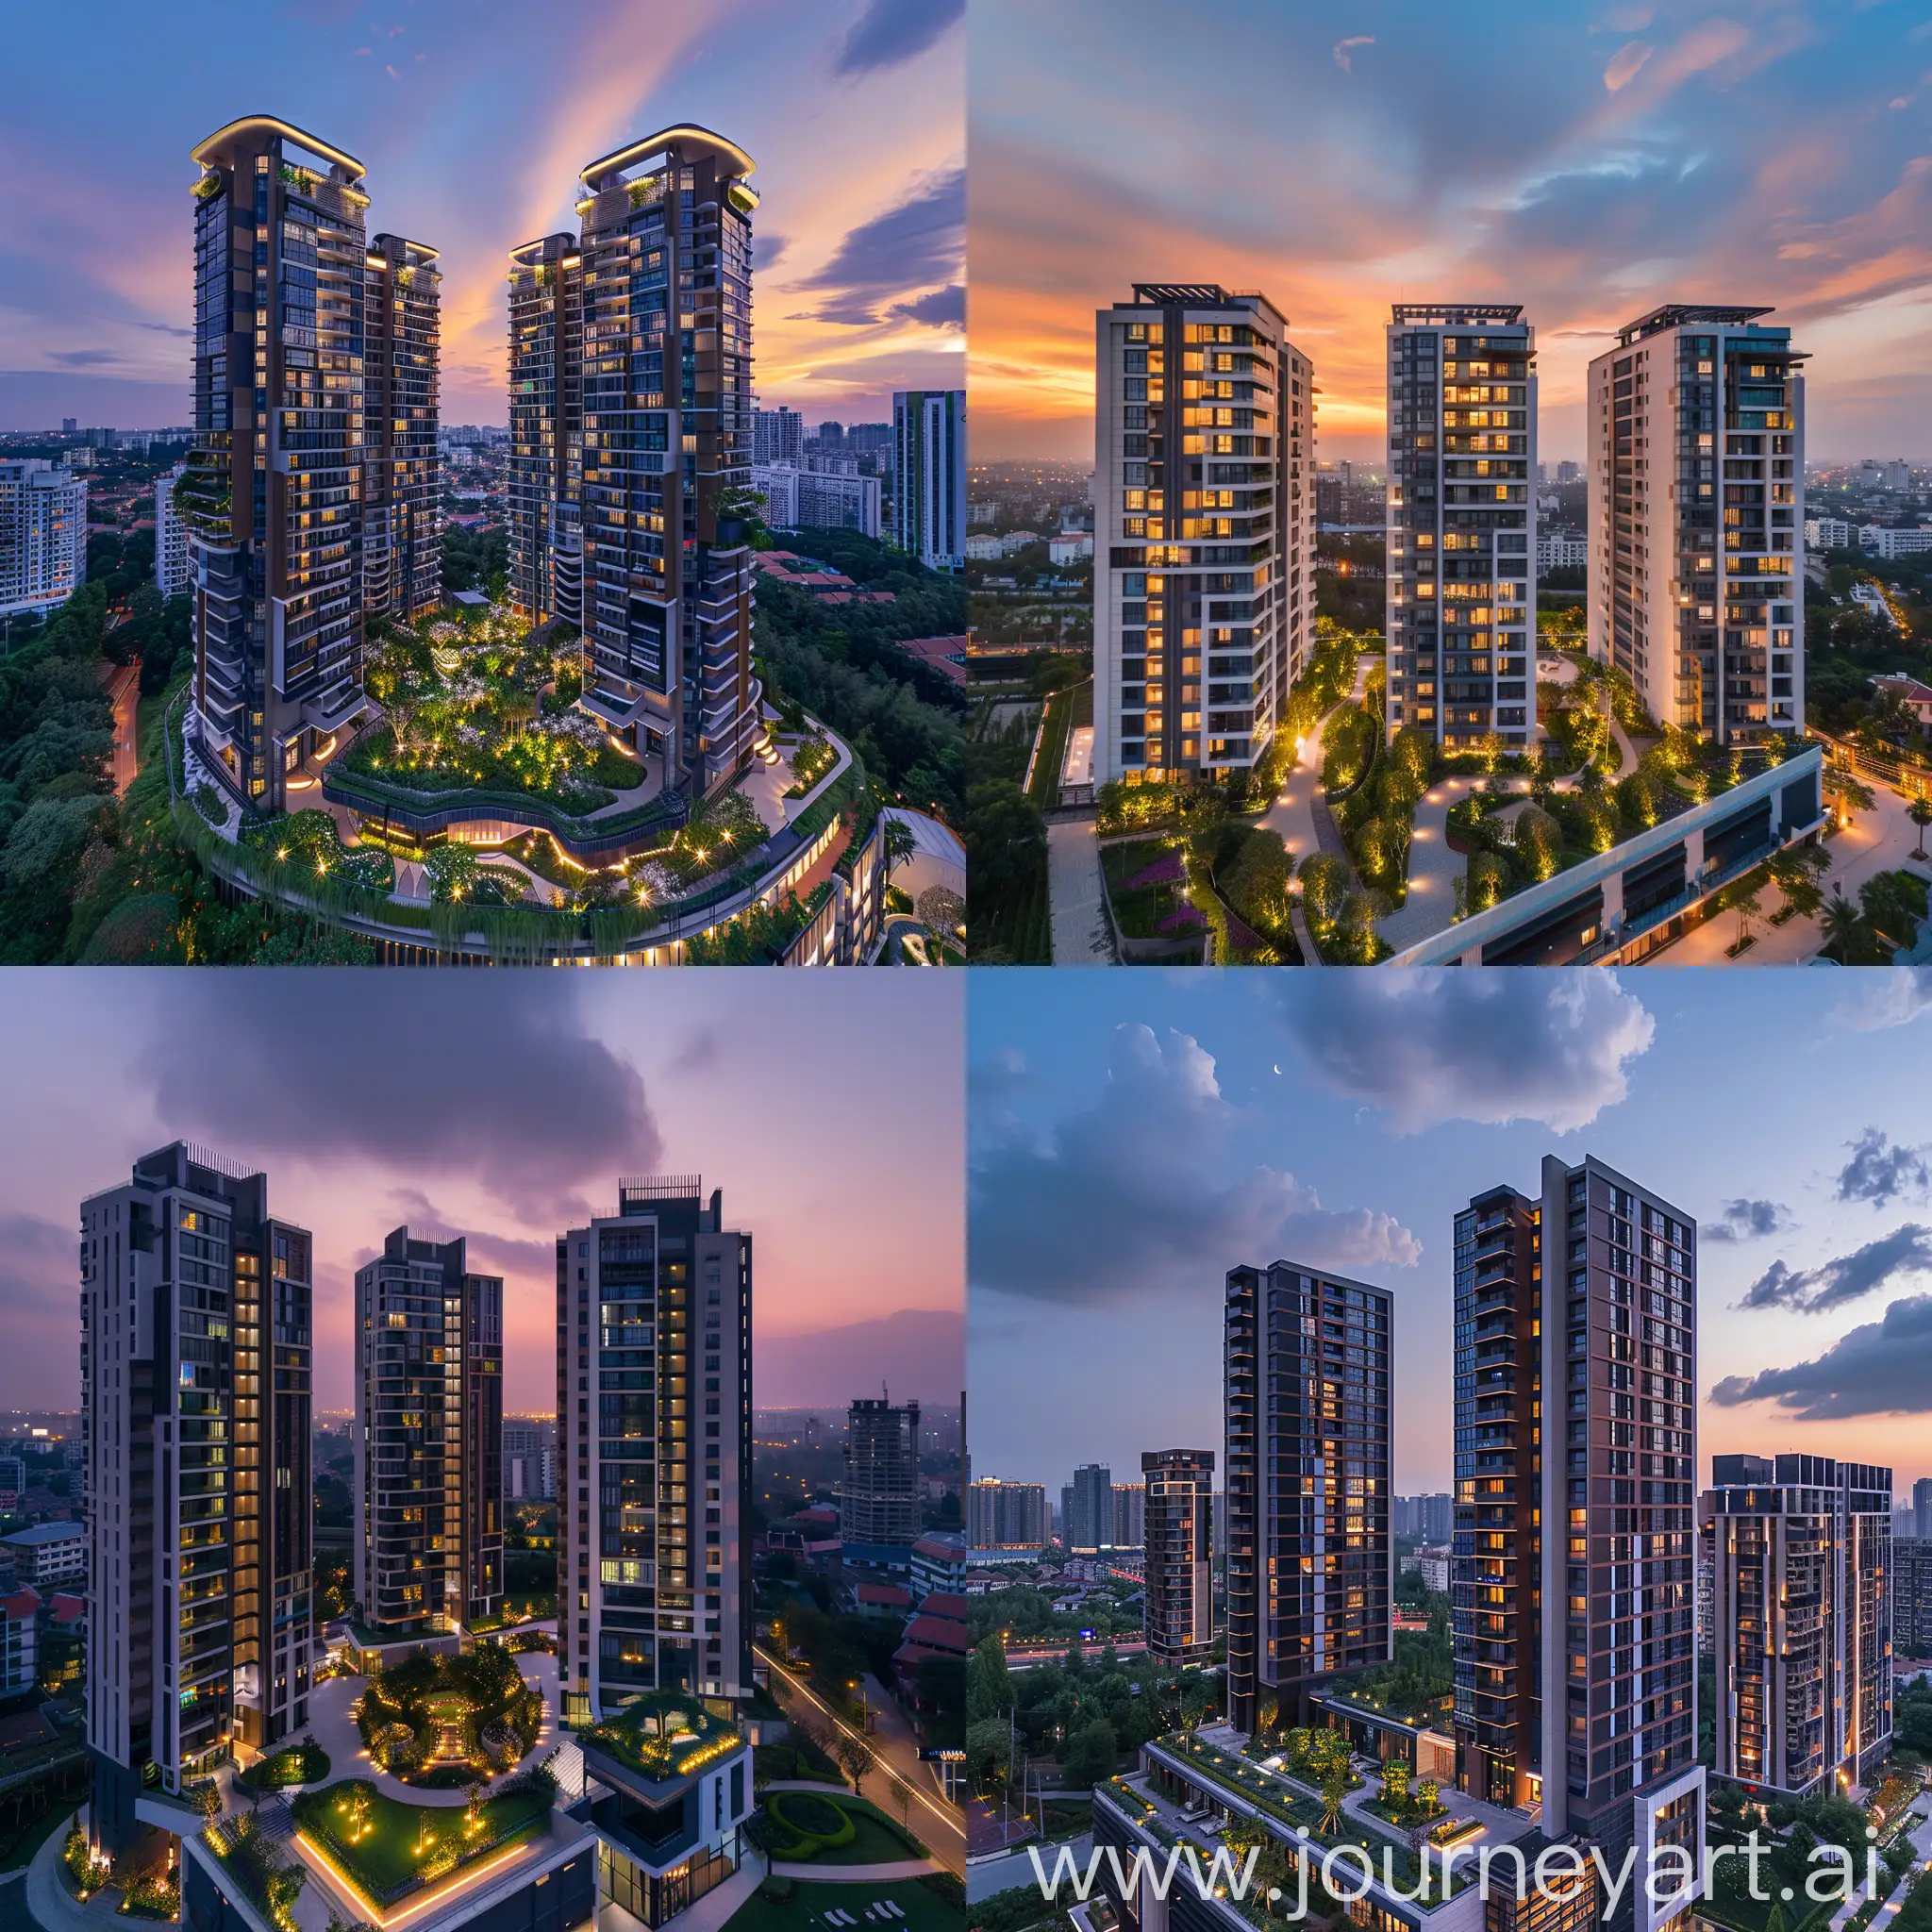 Drone shot, 3 breath taking modern looking elegant apartment towers, evening beautiful sky, elegant garden in the roof top, dramatic lighting.